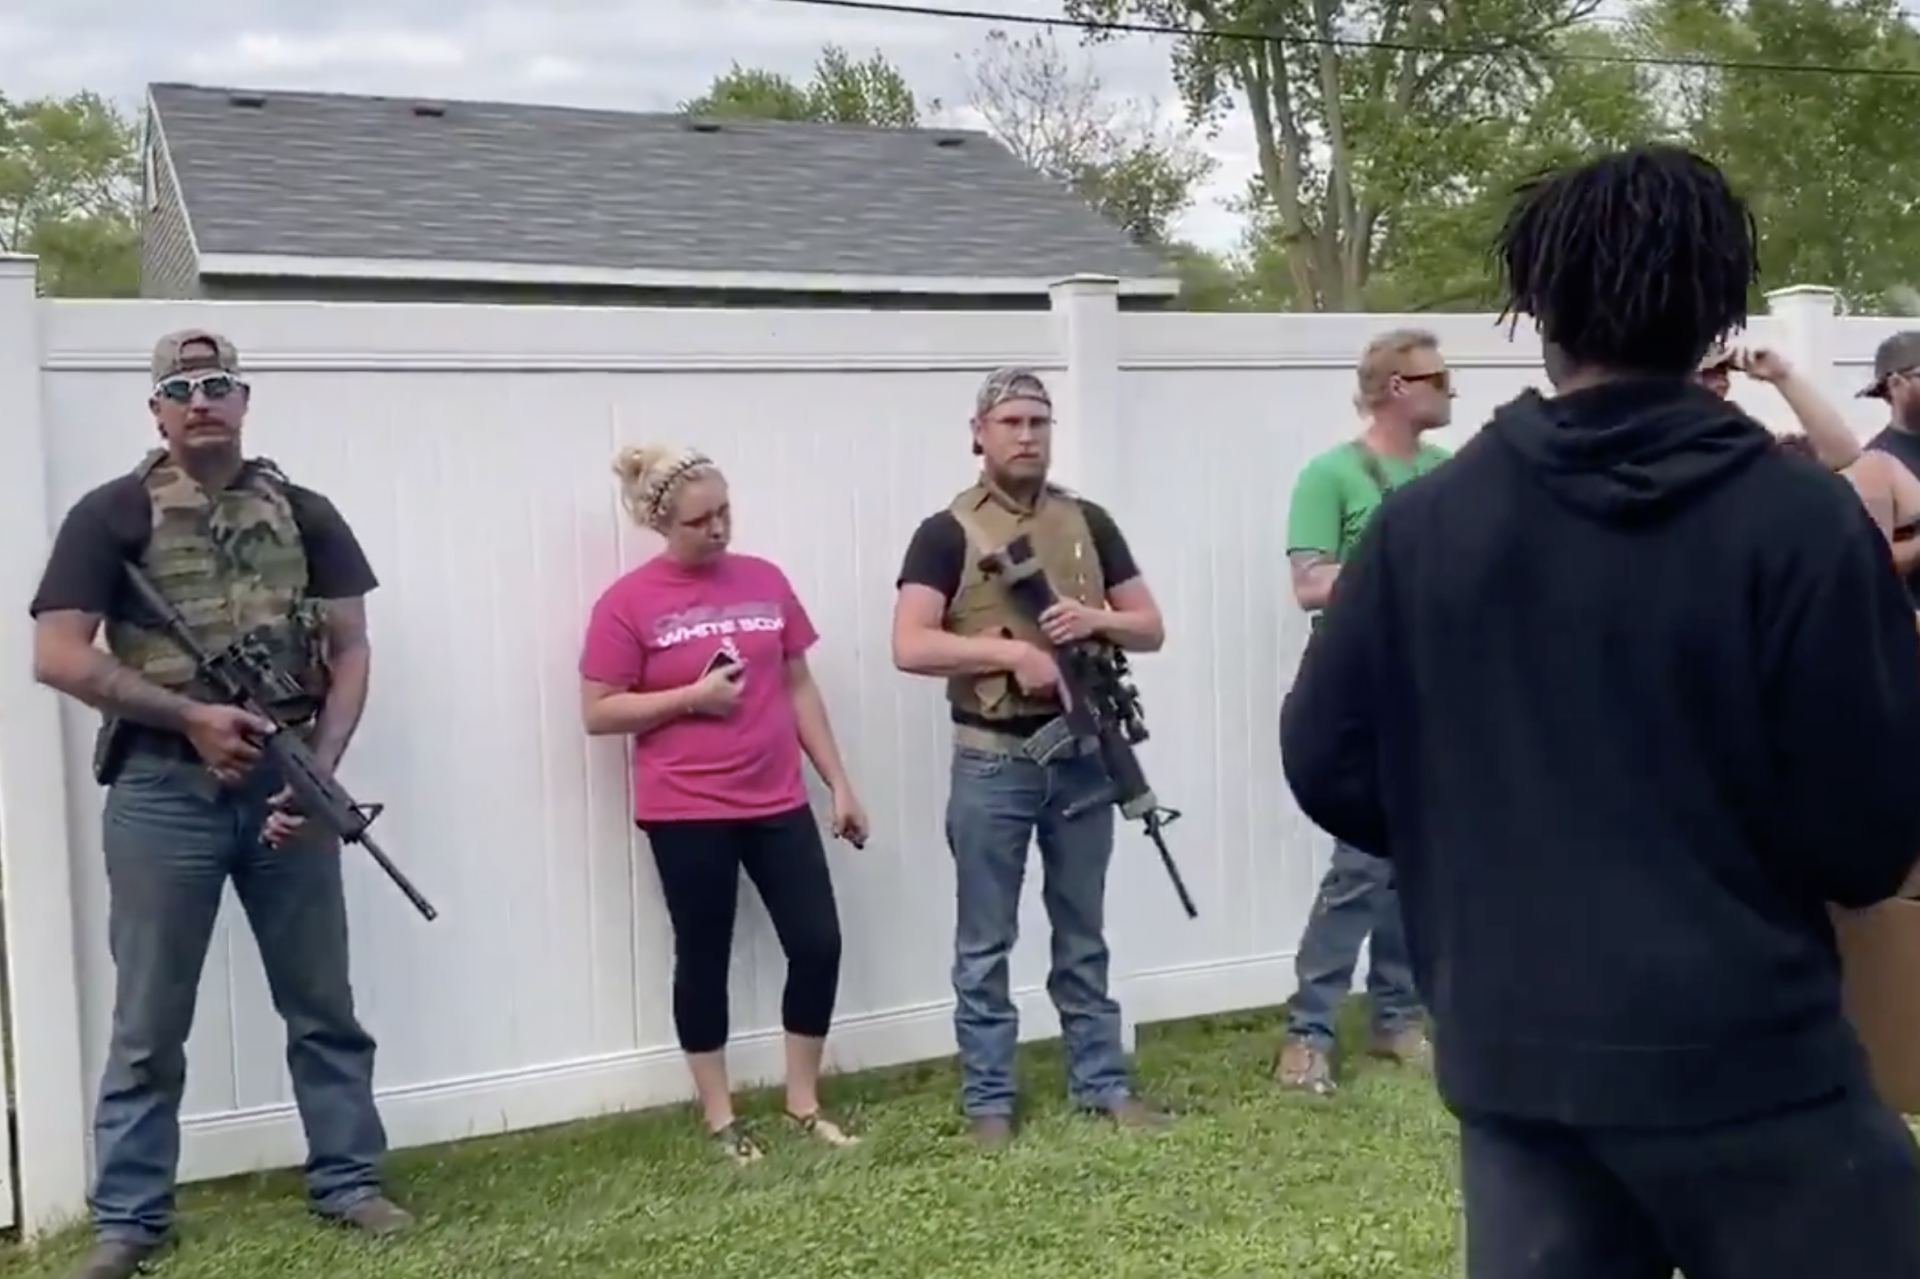 A Viral Video Shows A Neighborhood Of Armed White Males Who Came To A Black Lives Matter Boom